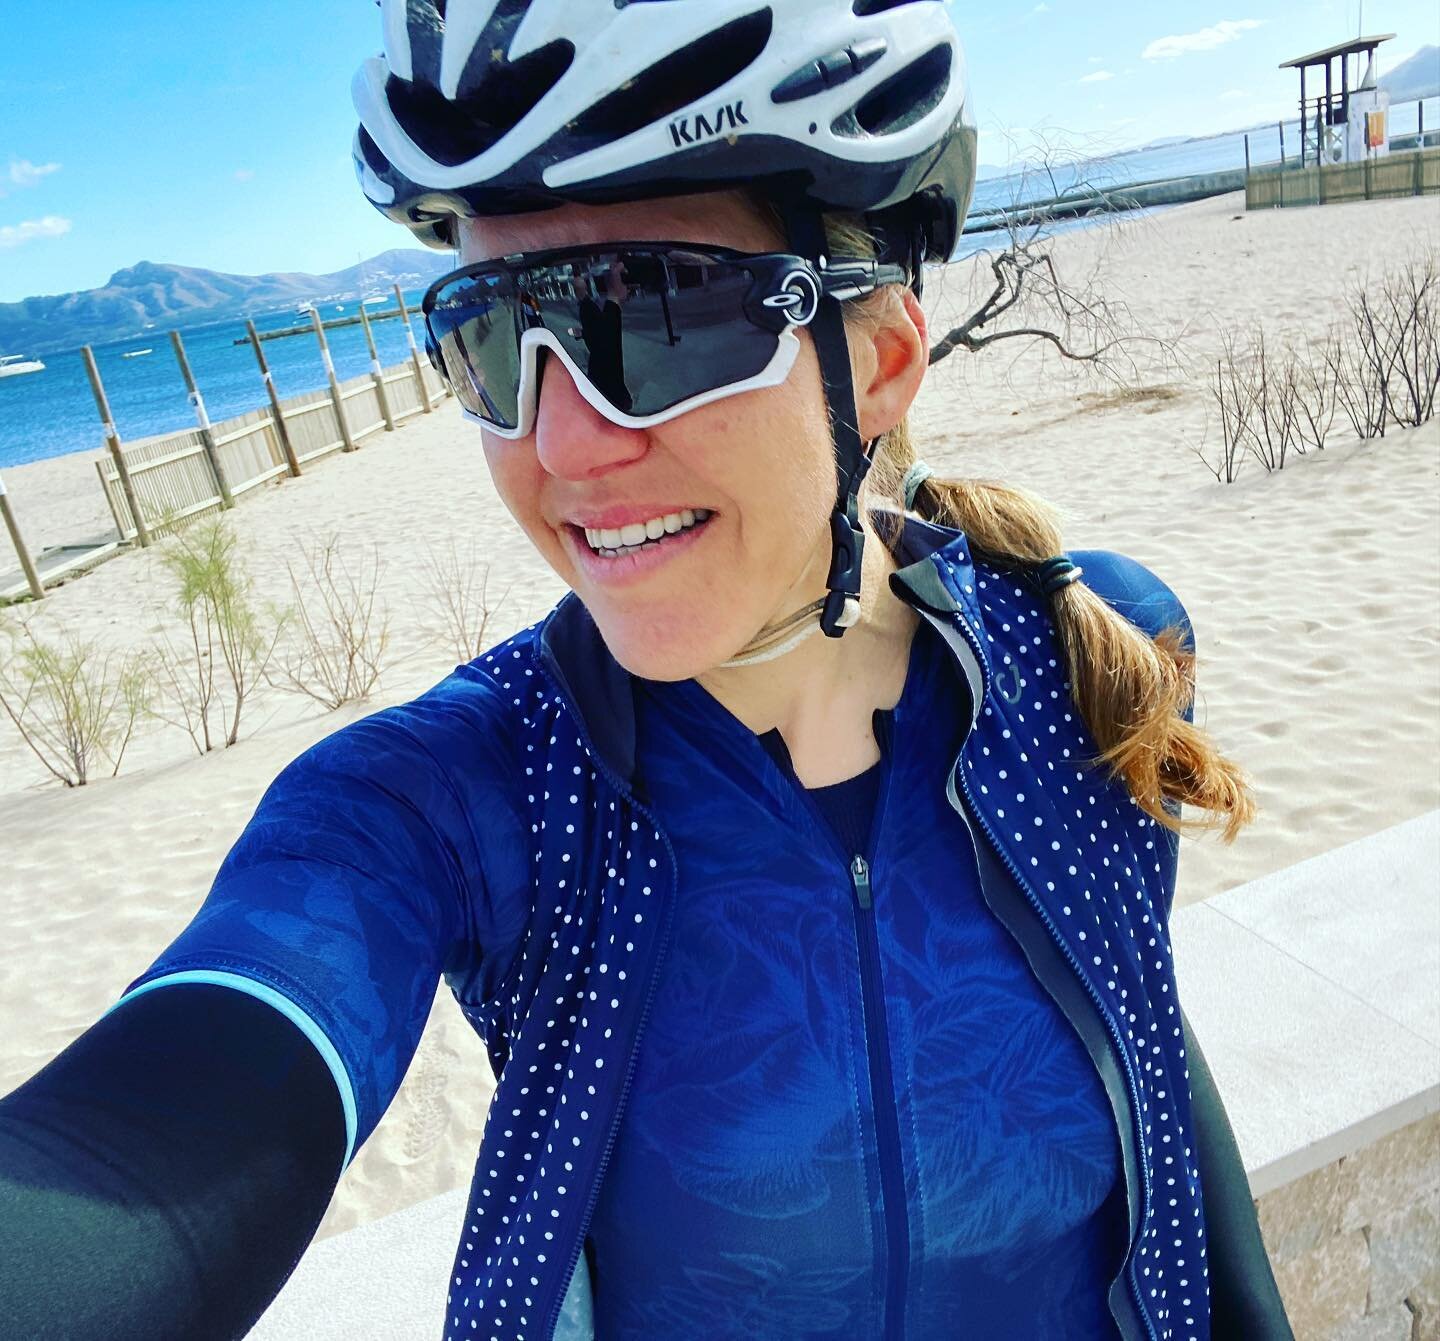 February Blues has a whole different meaning here in Mallorca #stillpinchmyself #chaseyourdreams #mallorcablues #februaryblues #mallorcacycling #velocioapparel #womenscycling #vengavenga